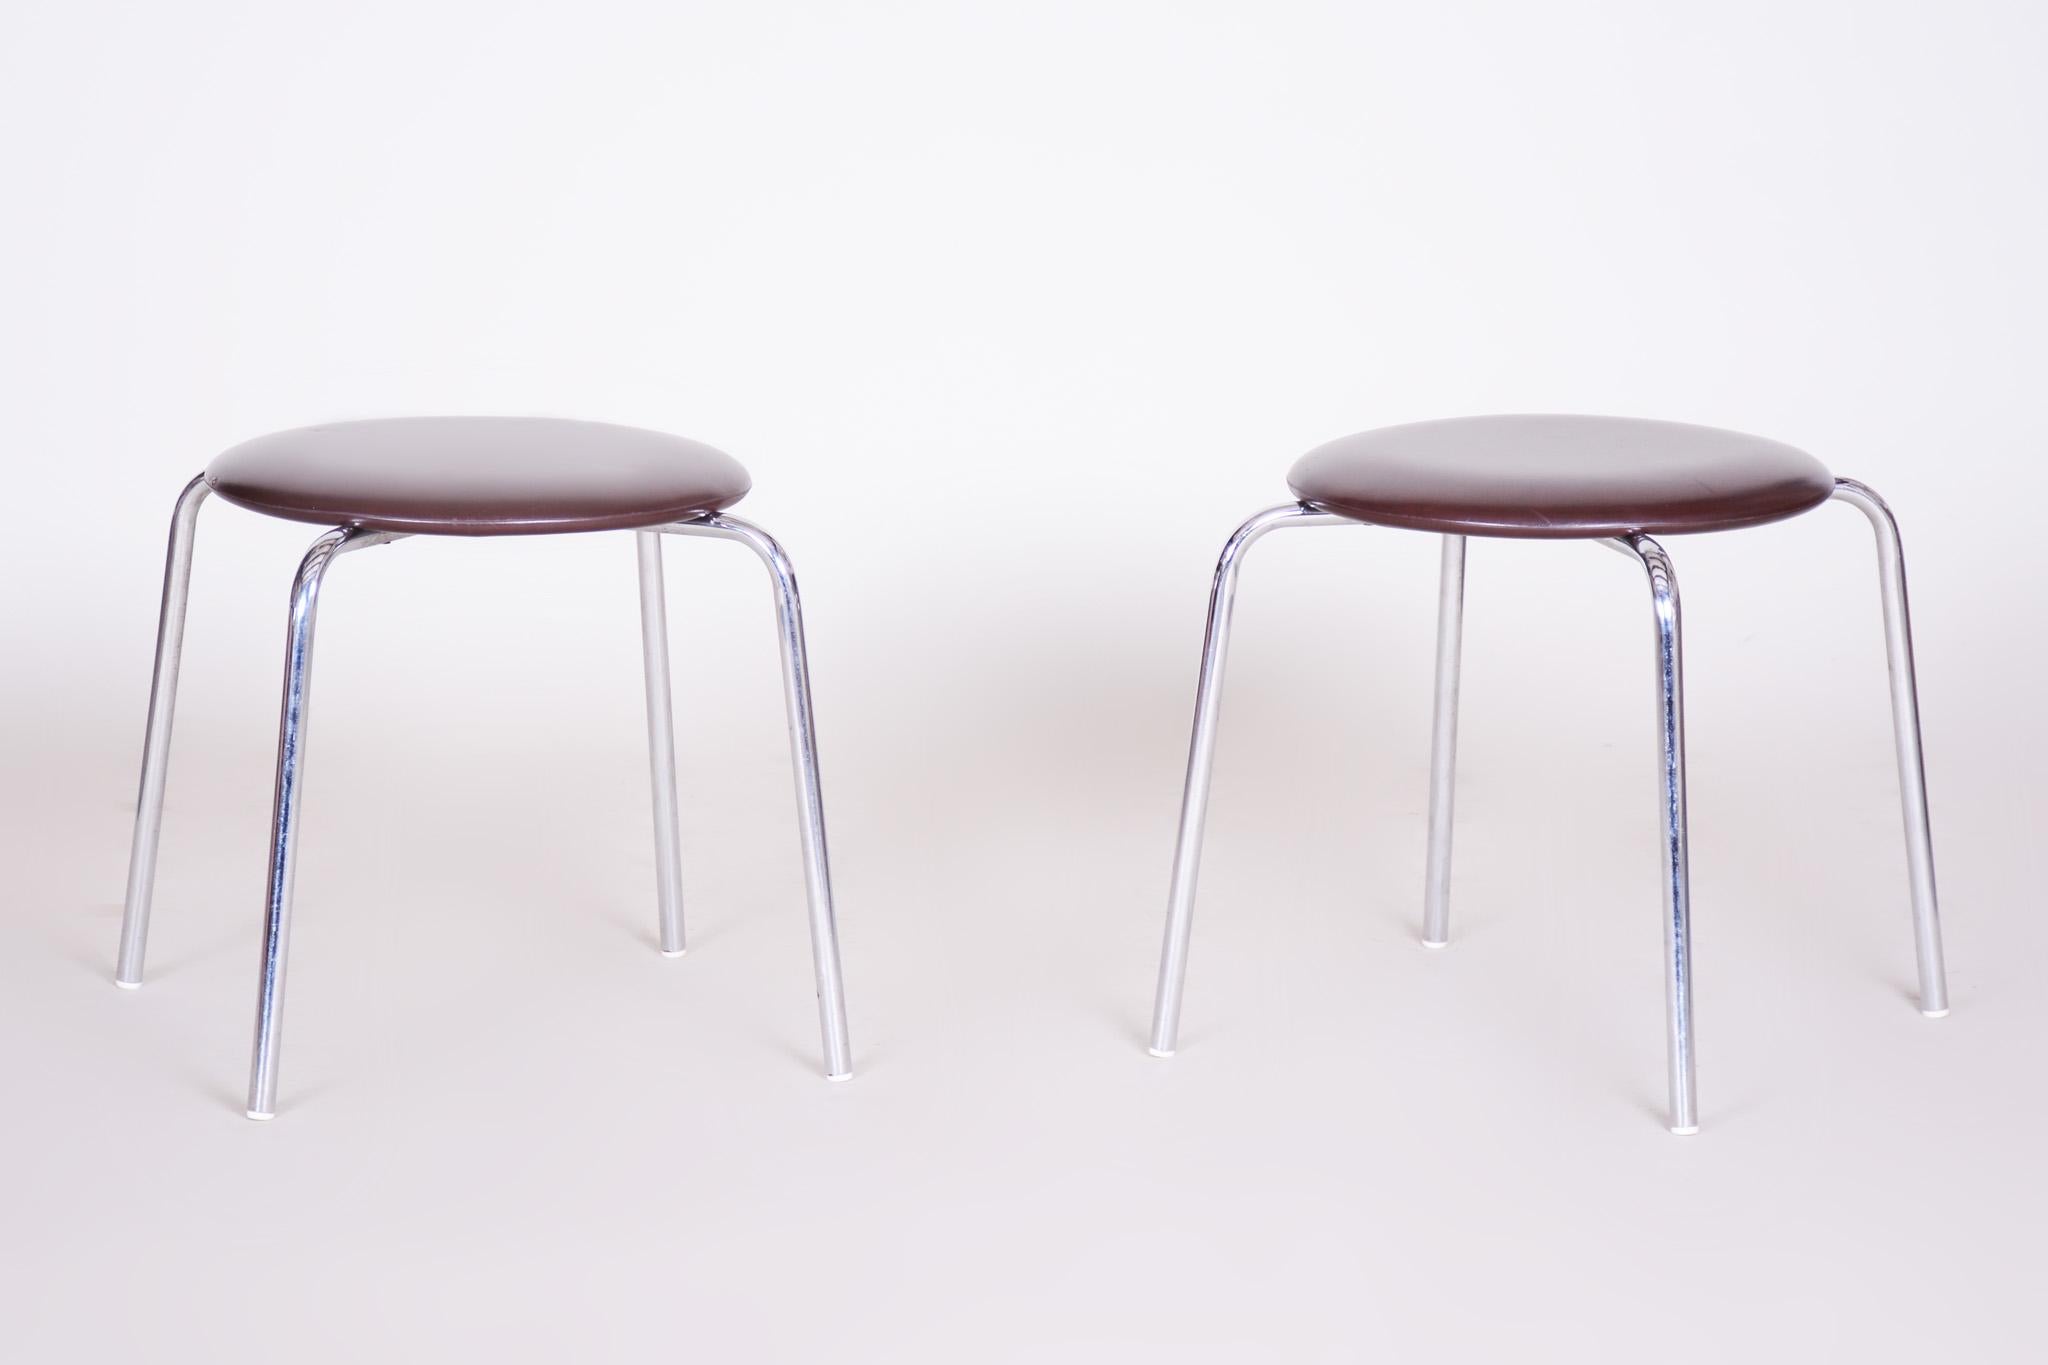 Midcentury stools, 
Original well preserved condition.

Period: 1960-1969
Material: Chrome plated steel and leatherette
Source: Czechia (Czechoslovakia).